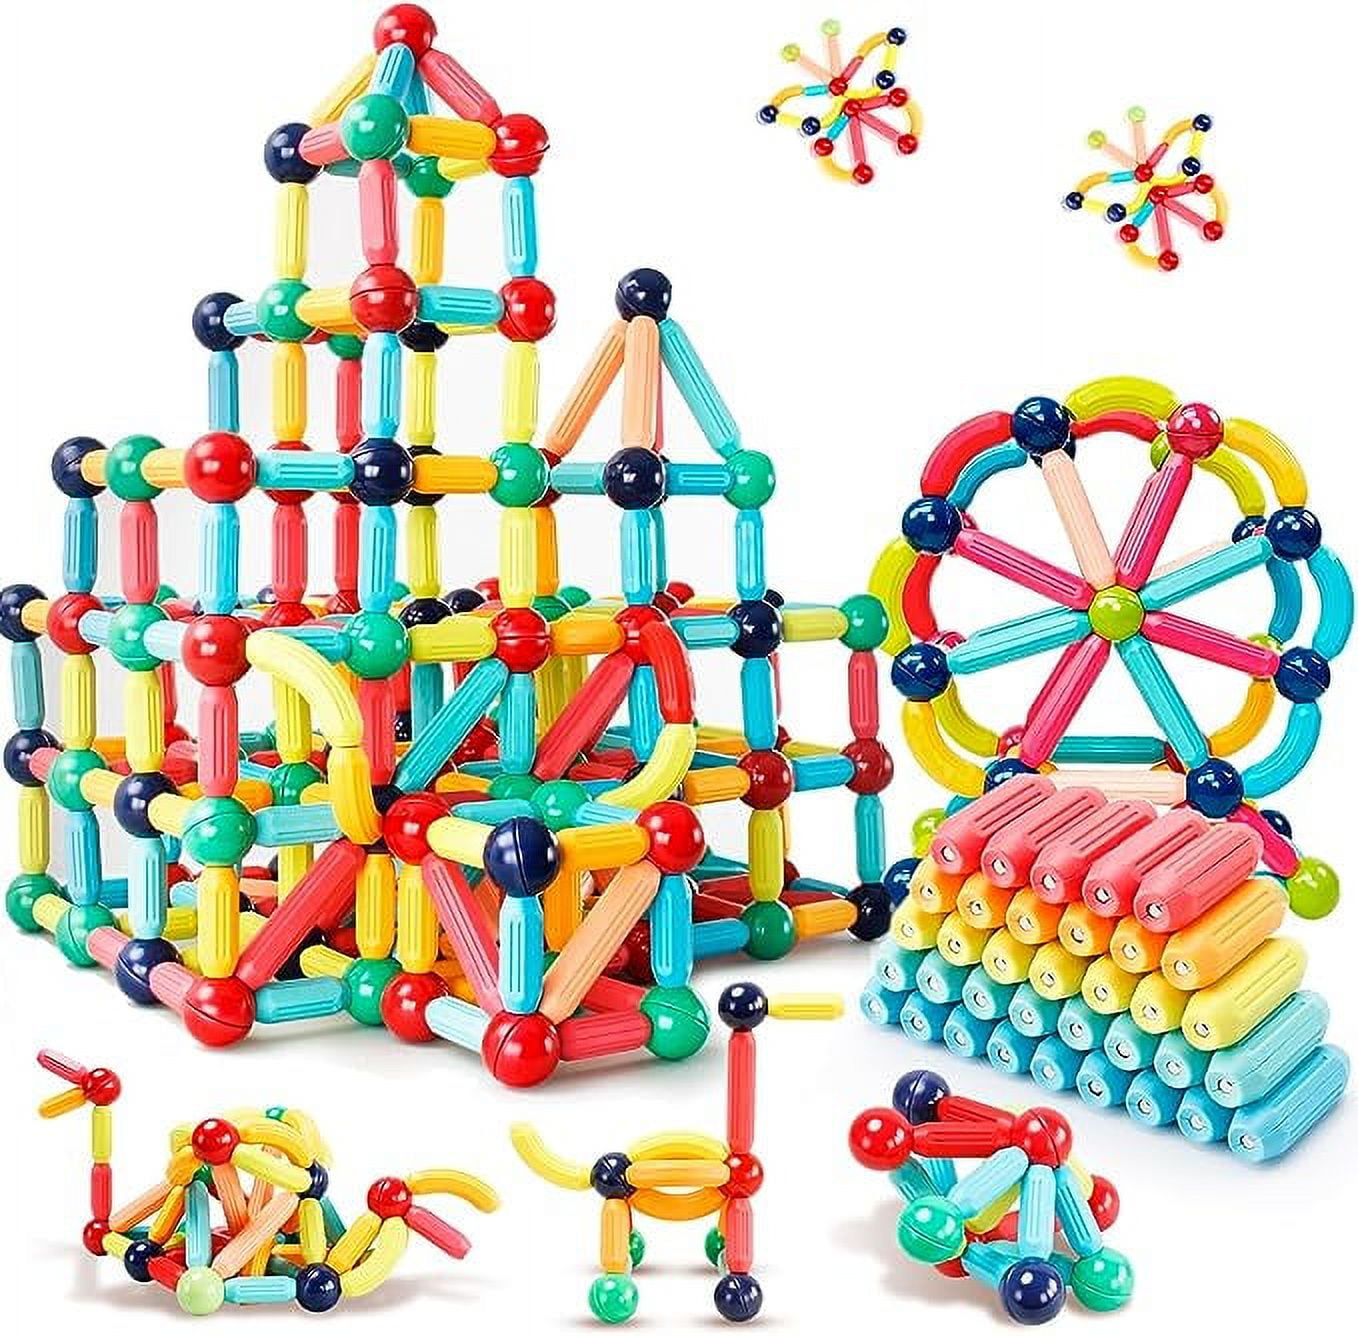  Magnetic Blocks Kids Toys for Boys and Girls 3-5 5-7 Year Old,  STEM Magnet Building Cubes for Toddler, Sensory Montessori Educational Toy  for Children Development and Creativity : Toys & Games